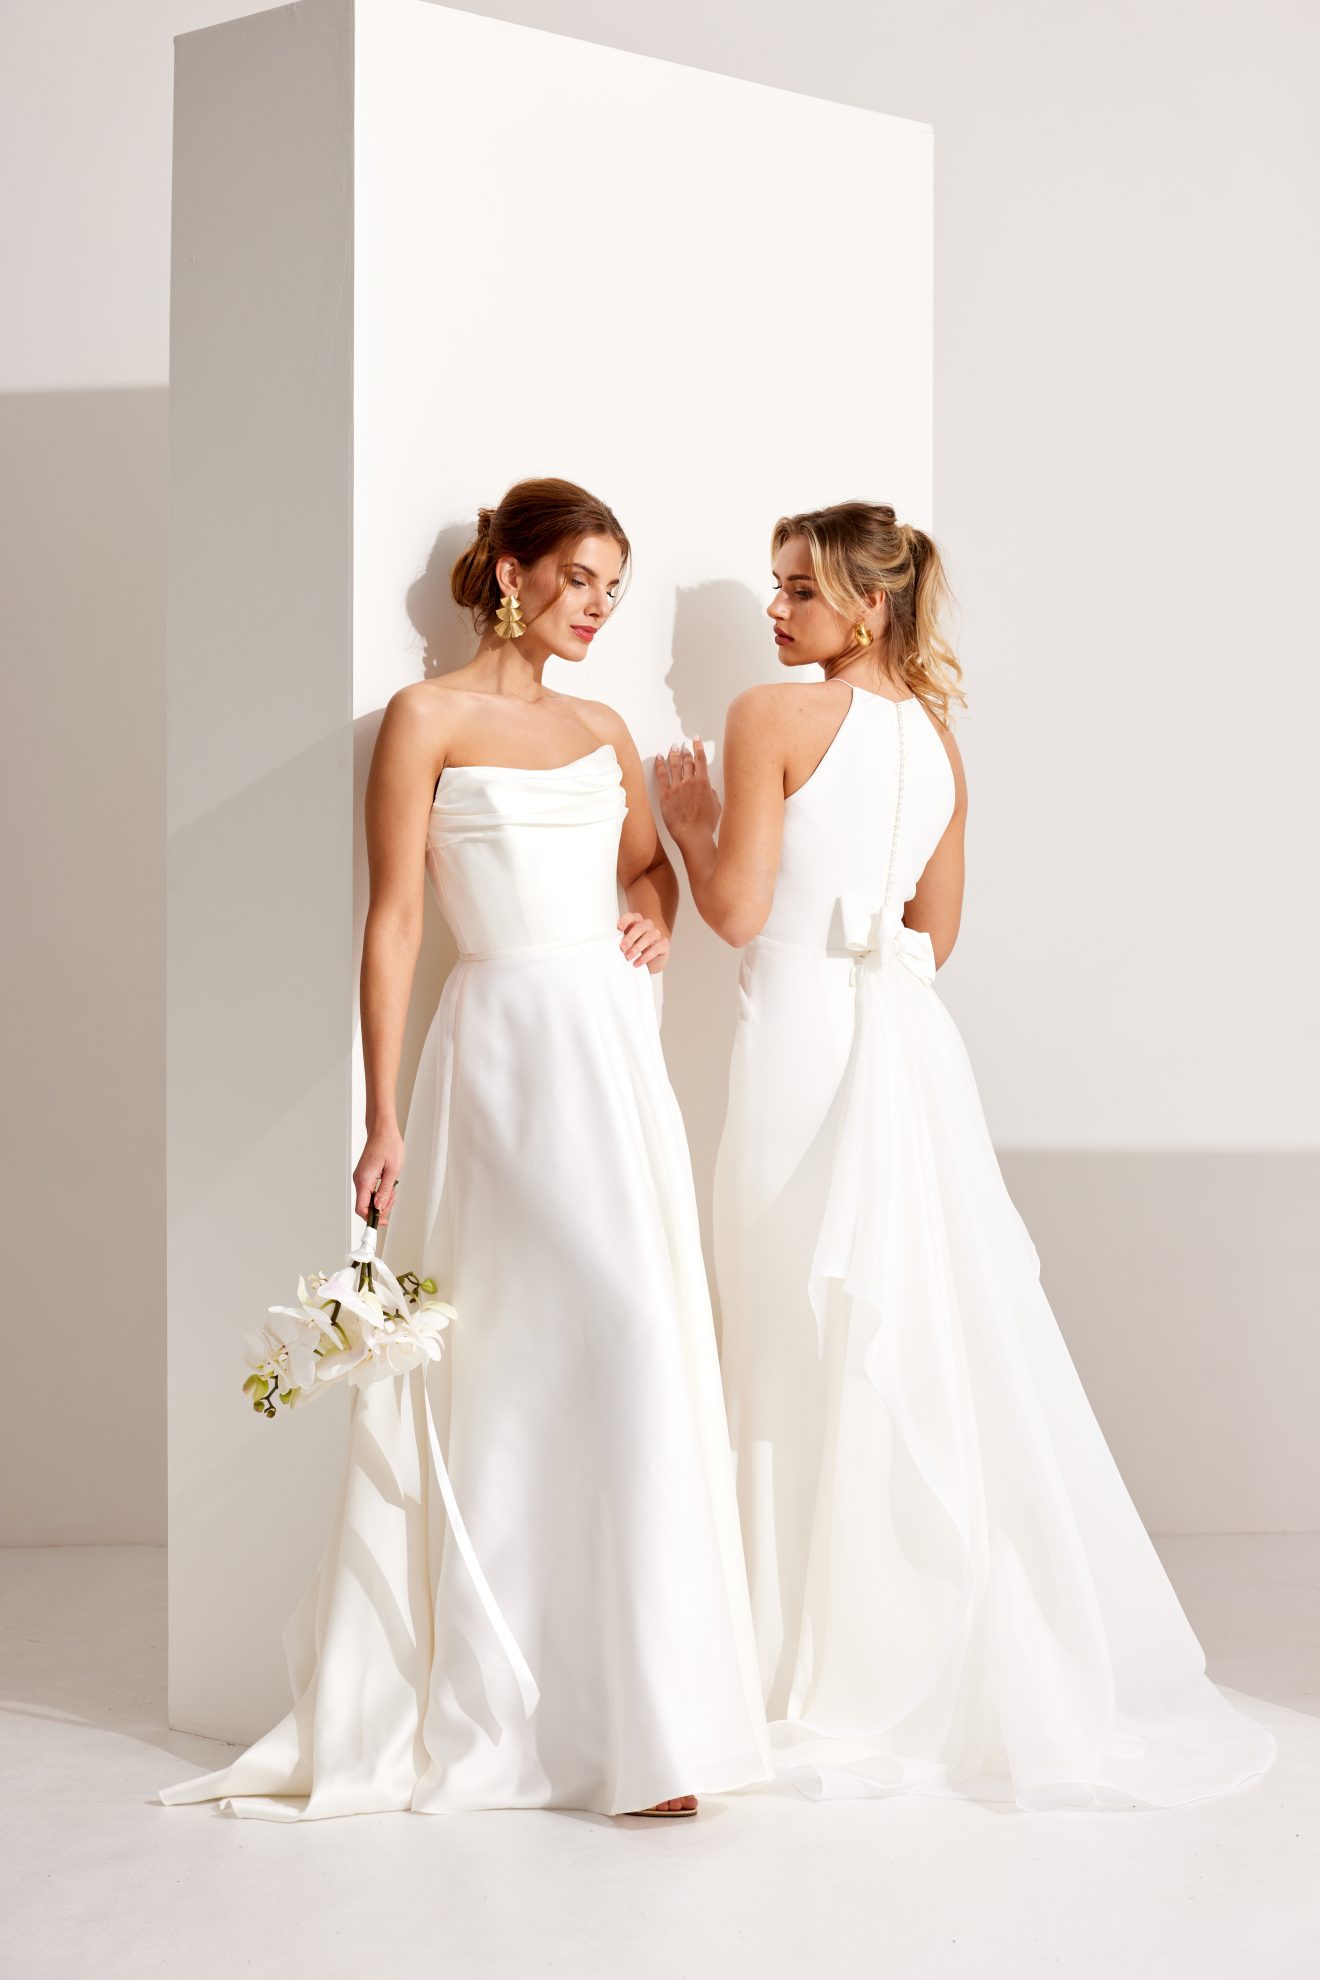 Wedding Dresses designed by AL Coutire Bridal who are running a dress giveaway with Ireland's Wedding Journal